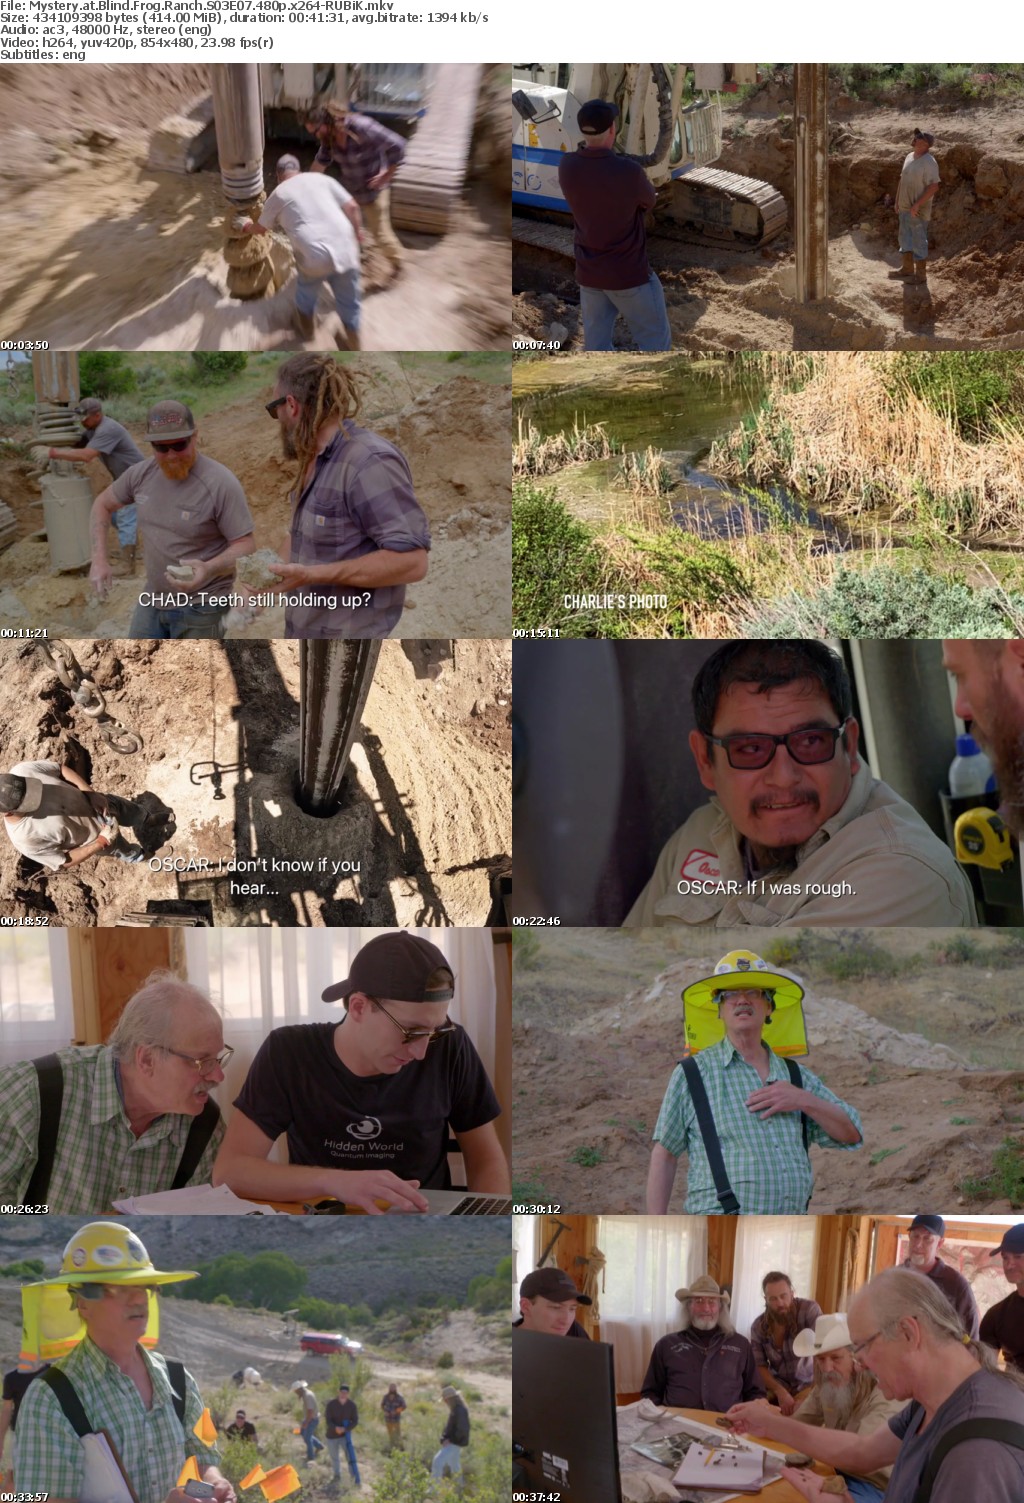 Mystery at Blind Frog Ranch S03E07 480p x264-RUBiK